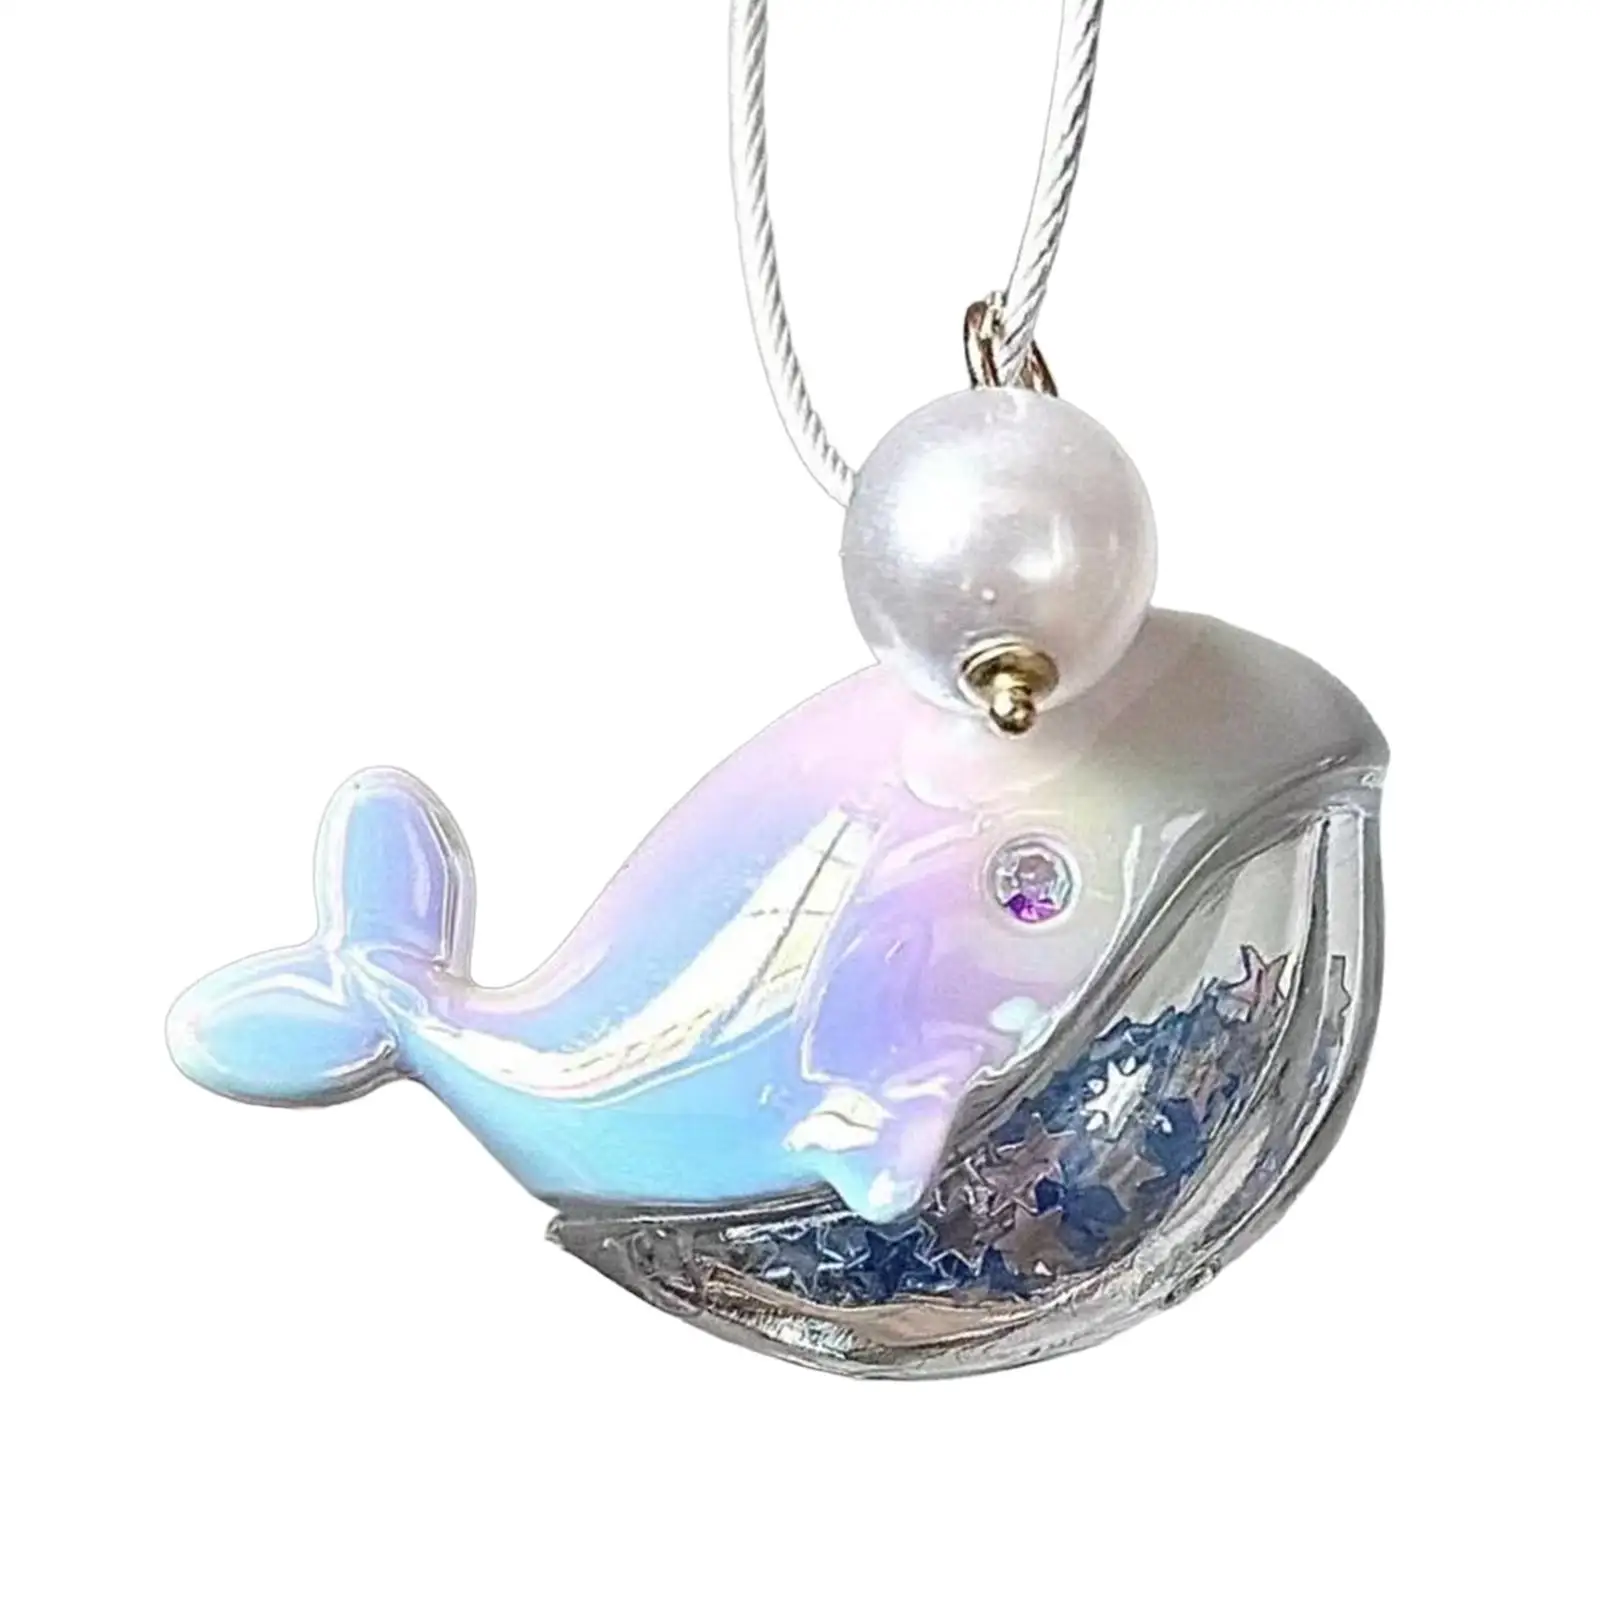 

Compact Whale Keychain Hanging Toy Cute Portable Animal Doll Keychain Bag Pendant for Key Handbag Purse Tote Goody Bags Filler